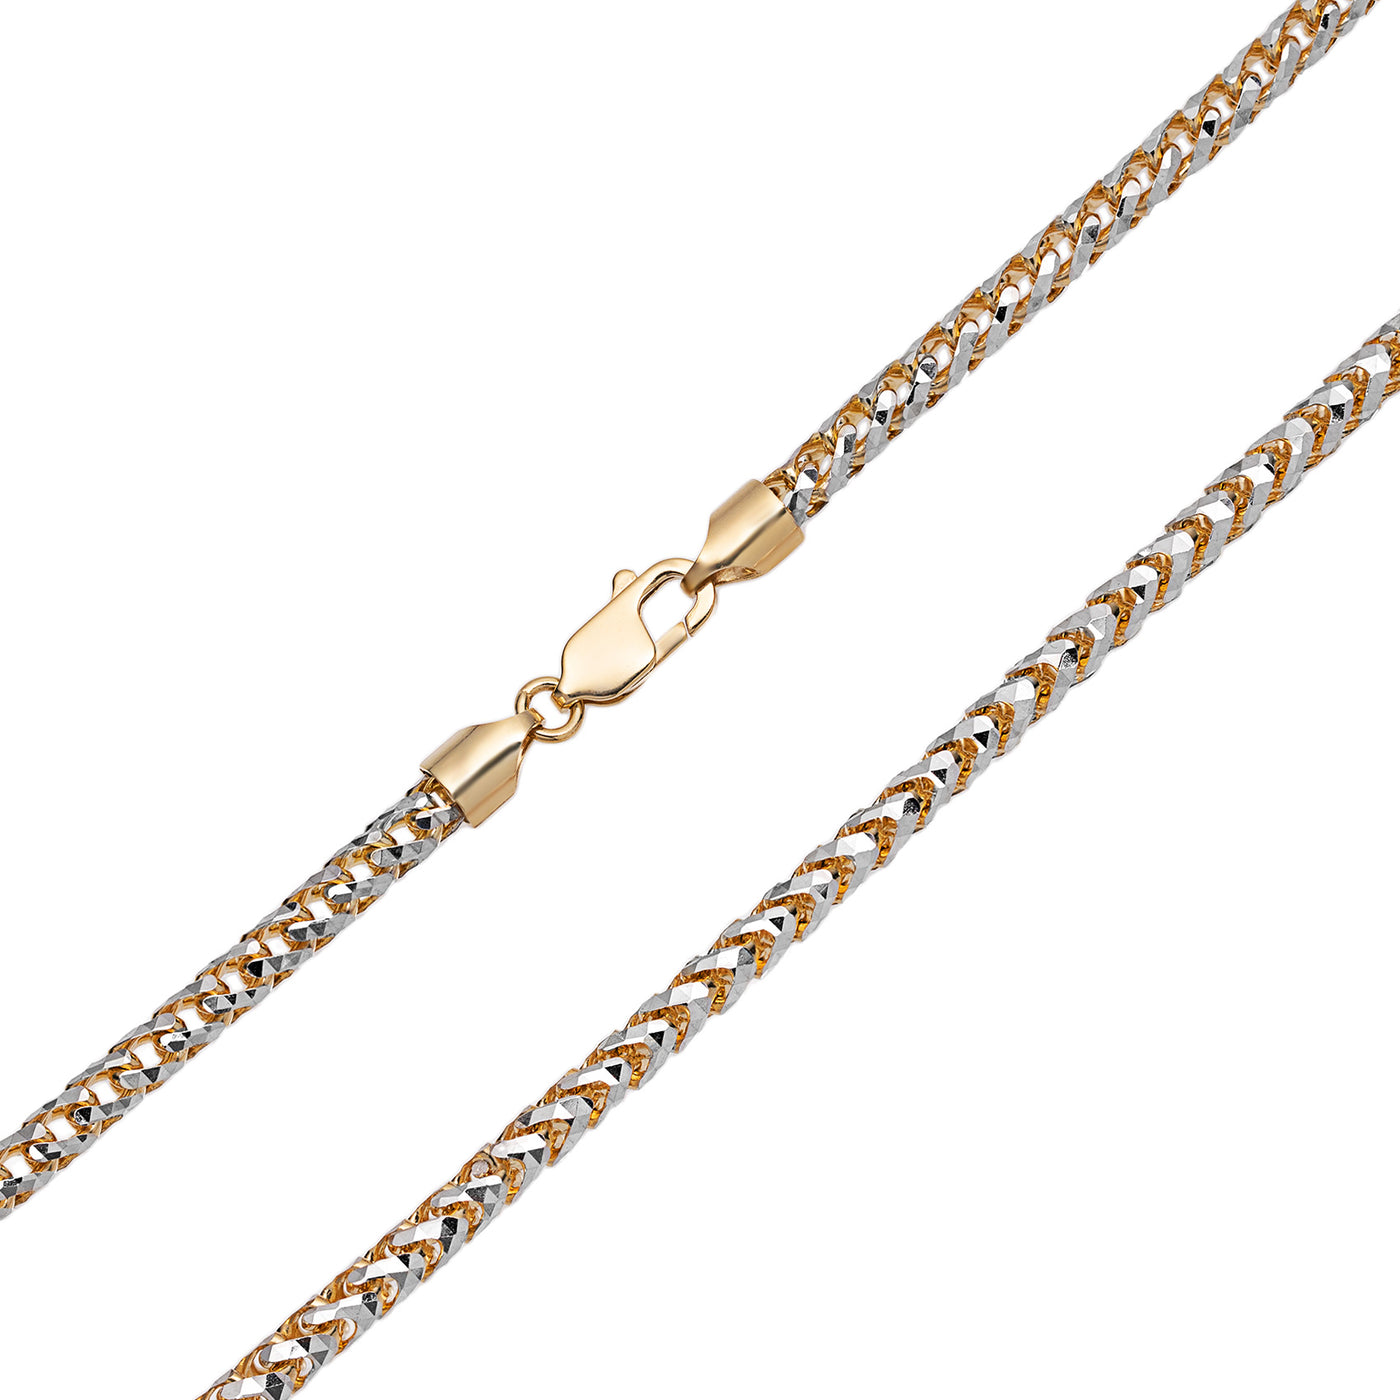 Women's Pave Round Franco Chain Necklace 10K Yellow White Gold